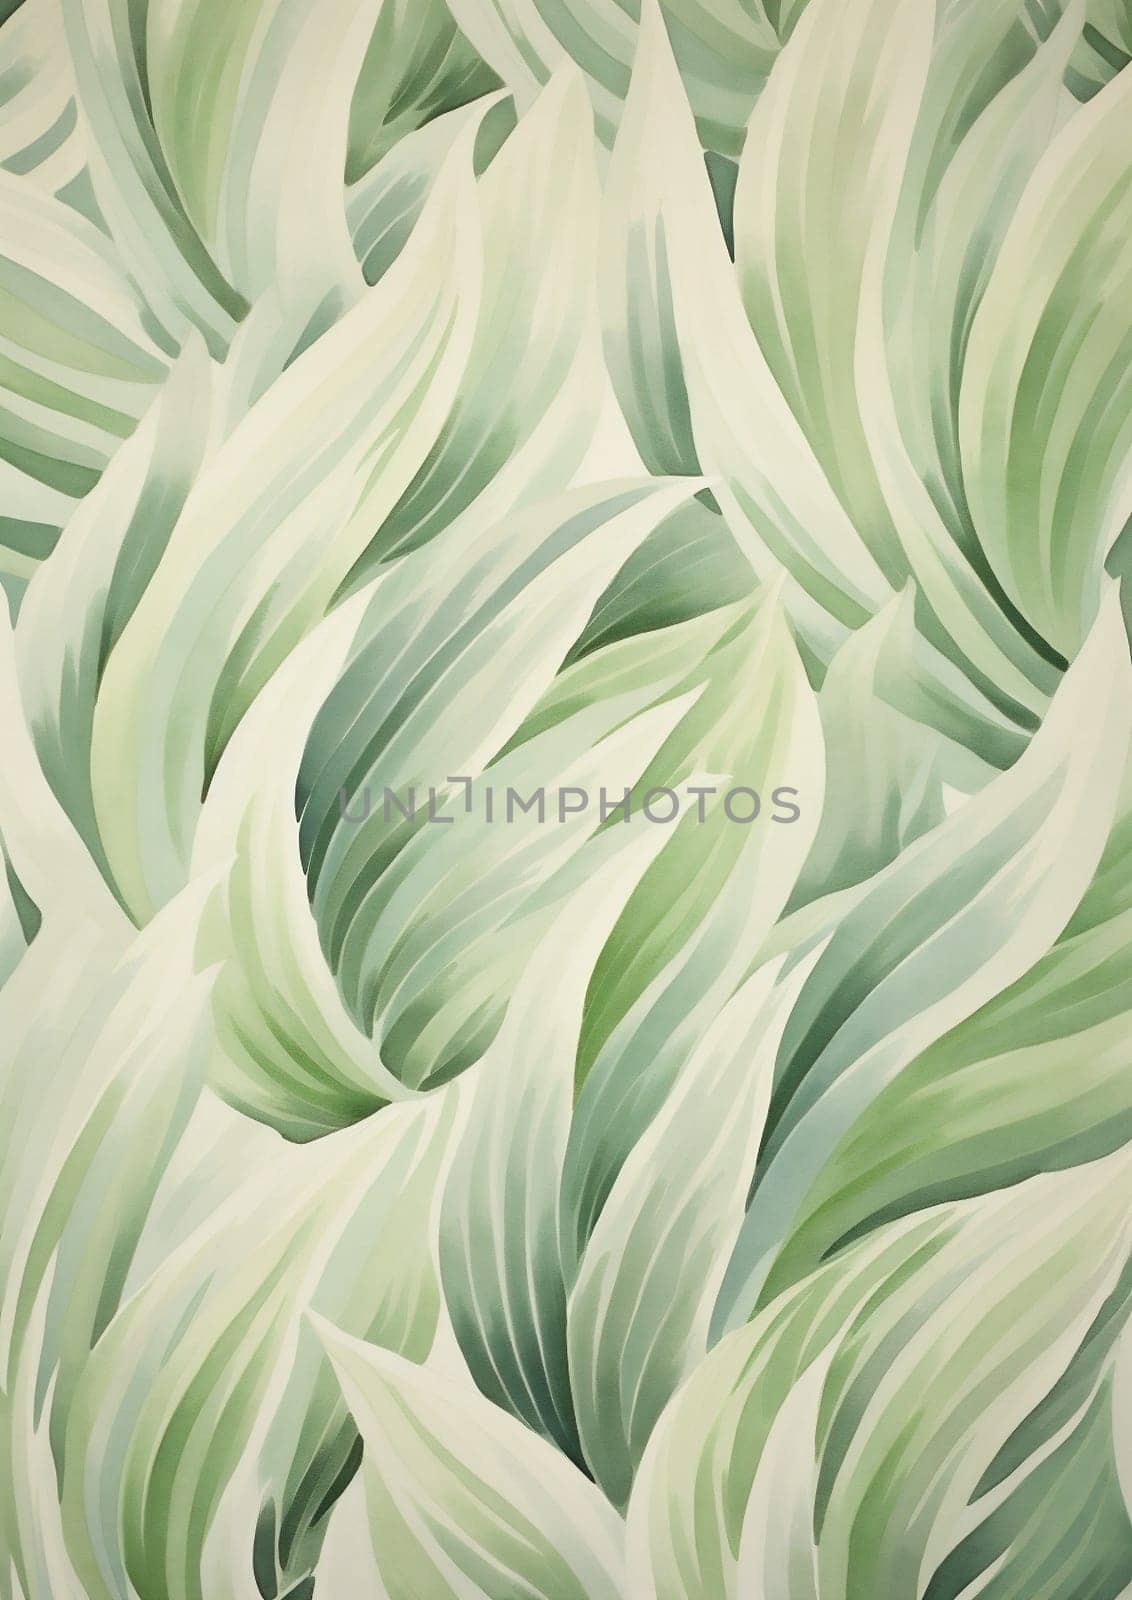 Texture design floral decorative wallpaper print seamless leaves art plant fabric nature fashion textile abstract illustration botanical green background pattern jungle